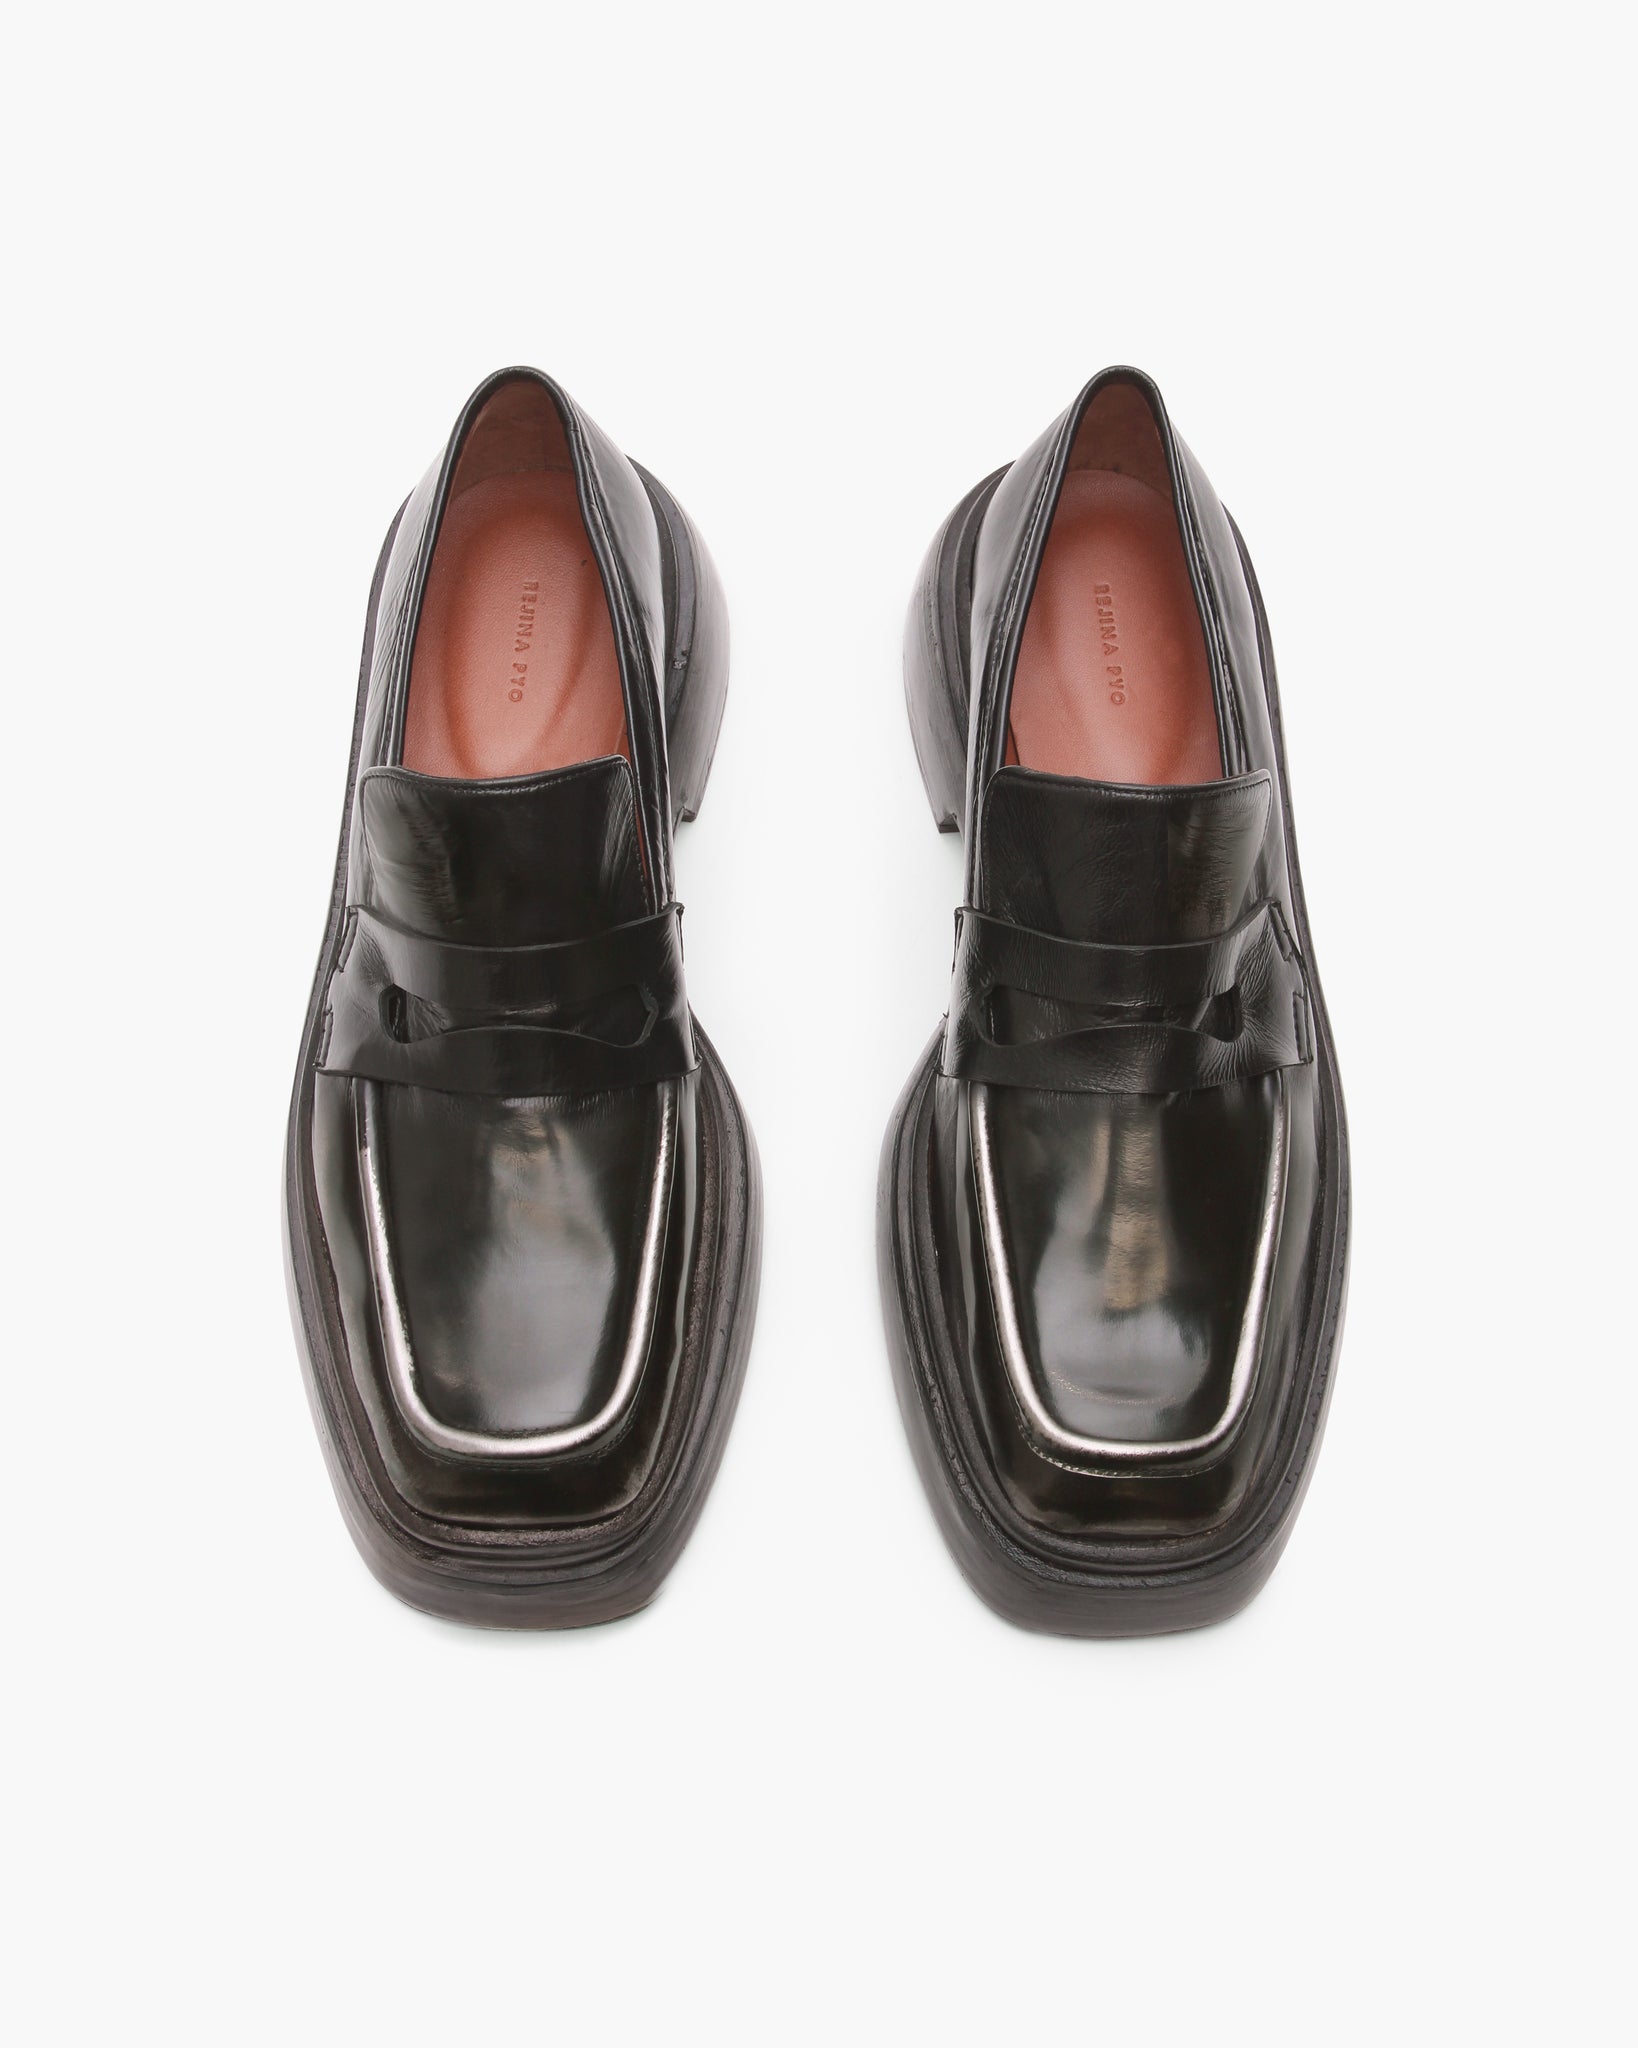 Elliot Loafer Leather Black + Silver - Special Price